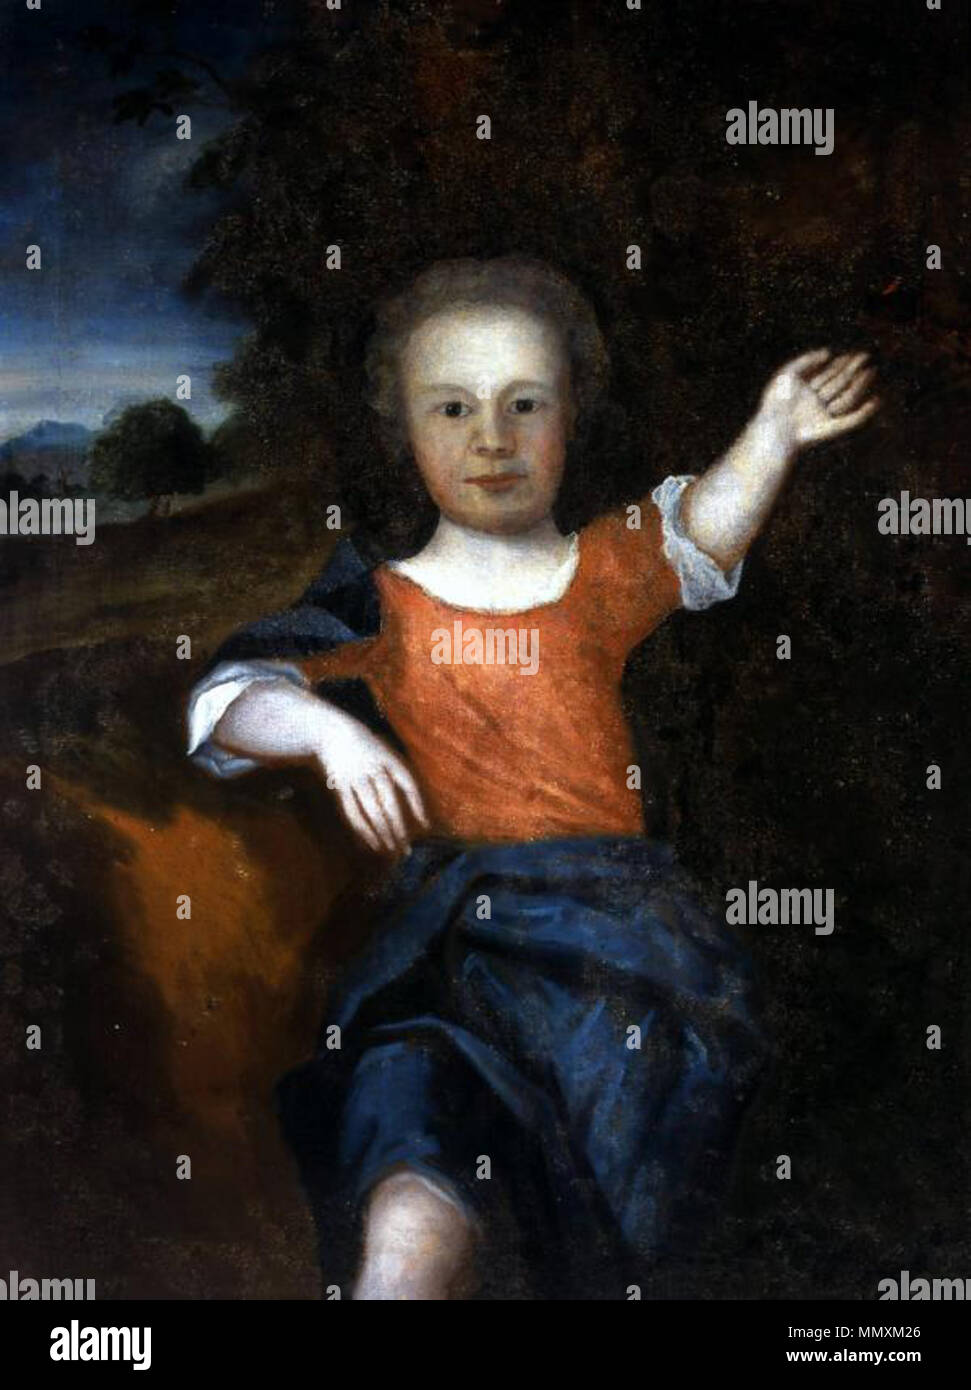 .  The portrait represents a child with short, curling hair, in the garment of a young boy: a bright red frock, with undershirt visible at the neck and cuffs. A vivid blue robe wraps his body below the waist. He is depicted outdoors, with trees behind him providing a dark background for his head and body. In the far distance is a hillside with a single tree standing on it, and a patch of sky visible at the upper left of the canvas. The child faces the viewer squarely, his left hand raised in salute; his right arm, bent at the elbow, rests on a raised hill? covered with red. Behind him is a cur Stock Photo